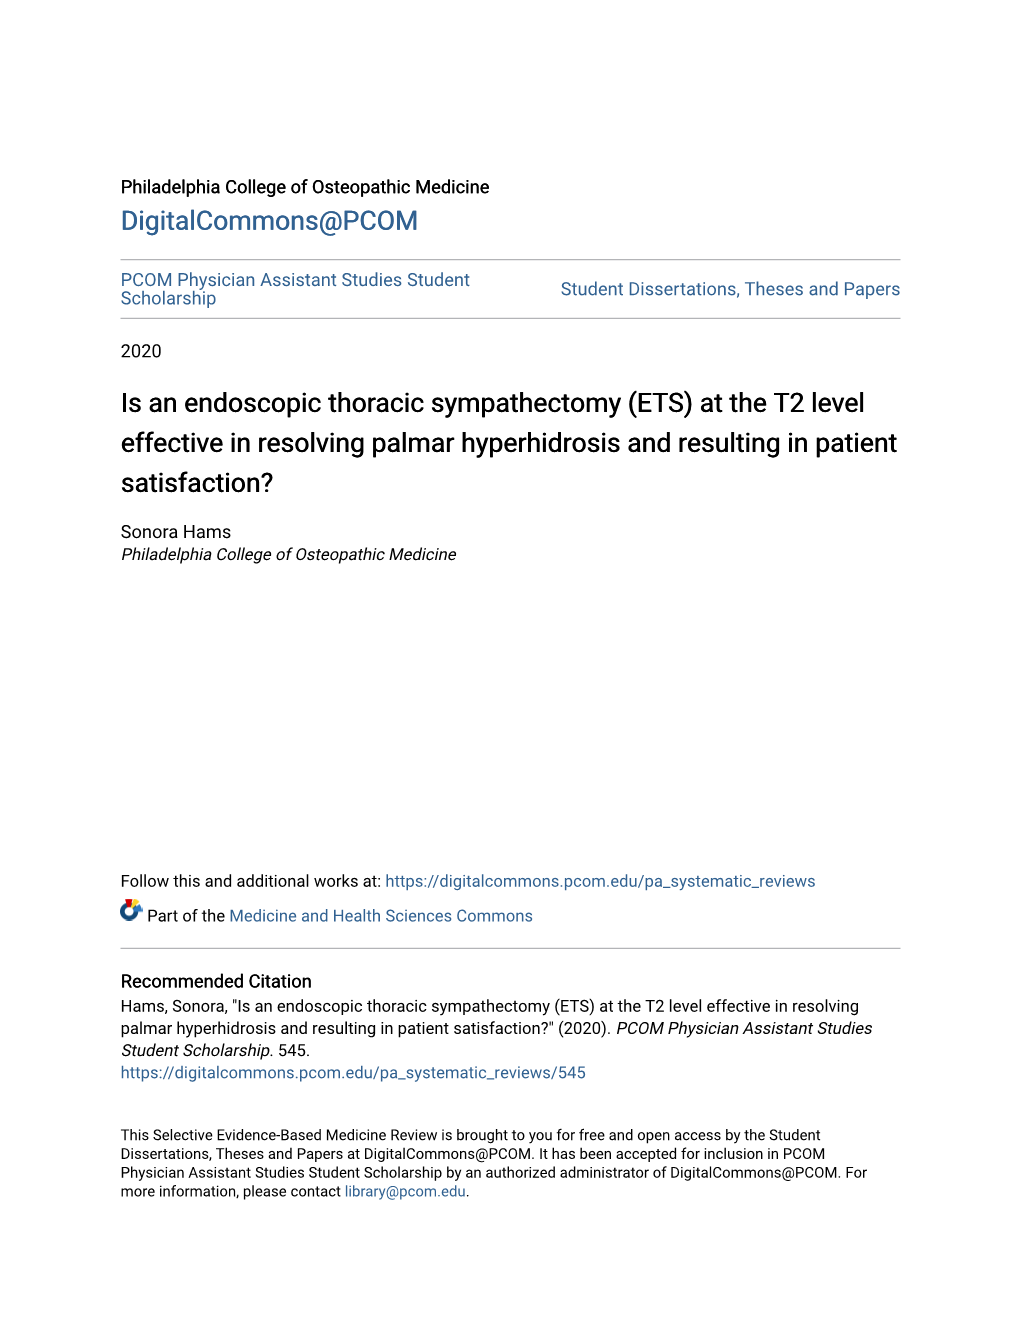 Is an Endoscopic Thoracic Sympathectomy (ETS) at the T2 Level Effective in Resolving Palmar Hyperhidrosis and Resulting in Patient Satisfaction?